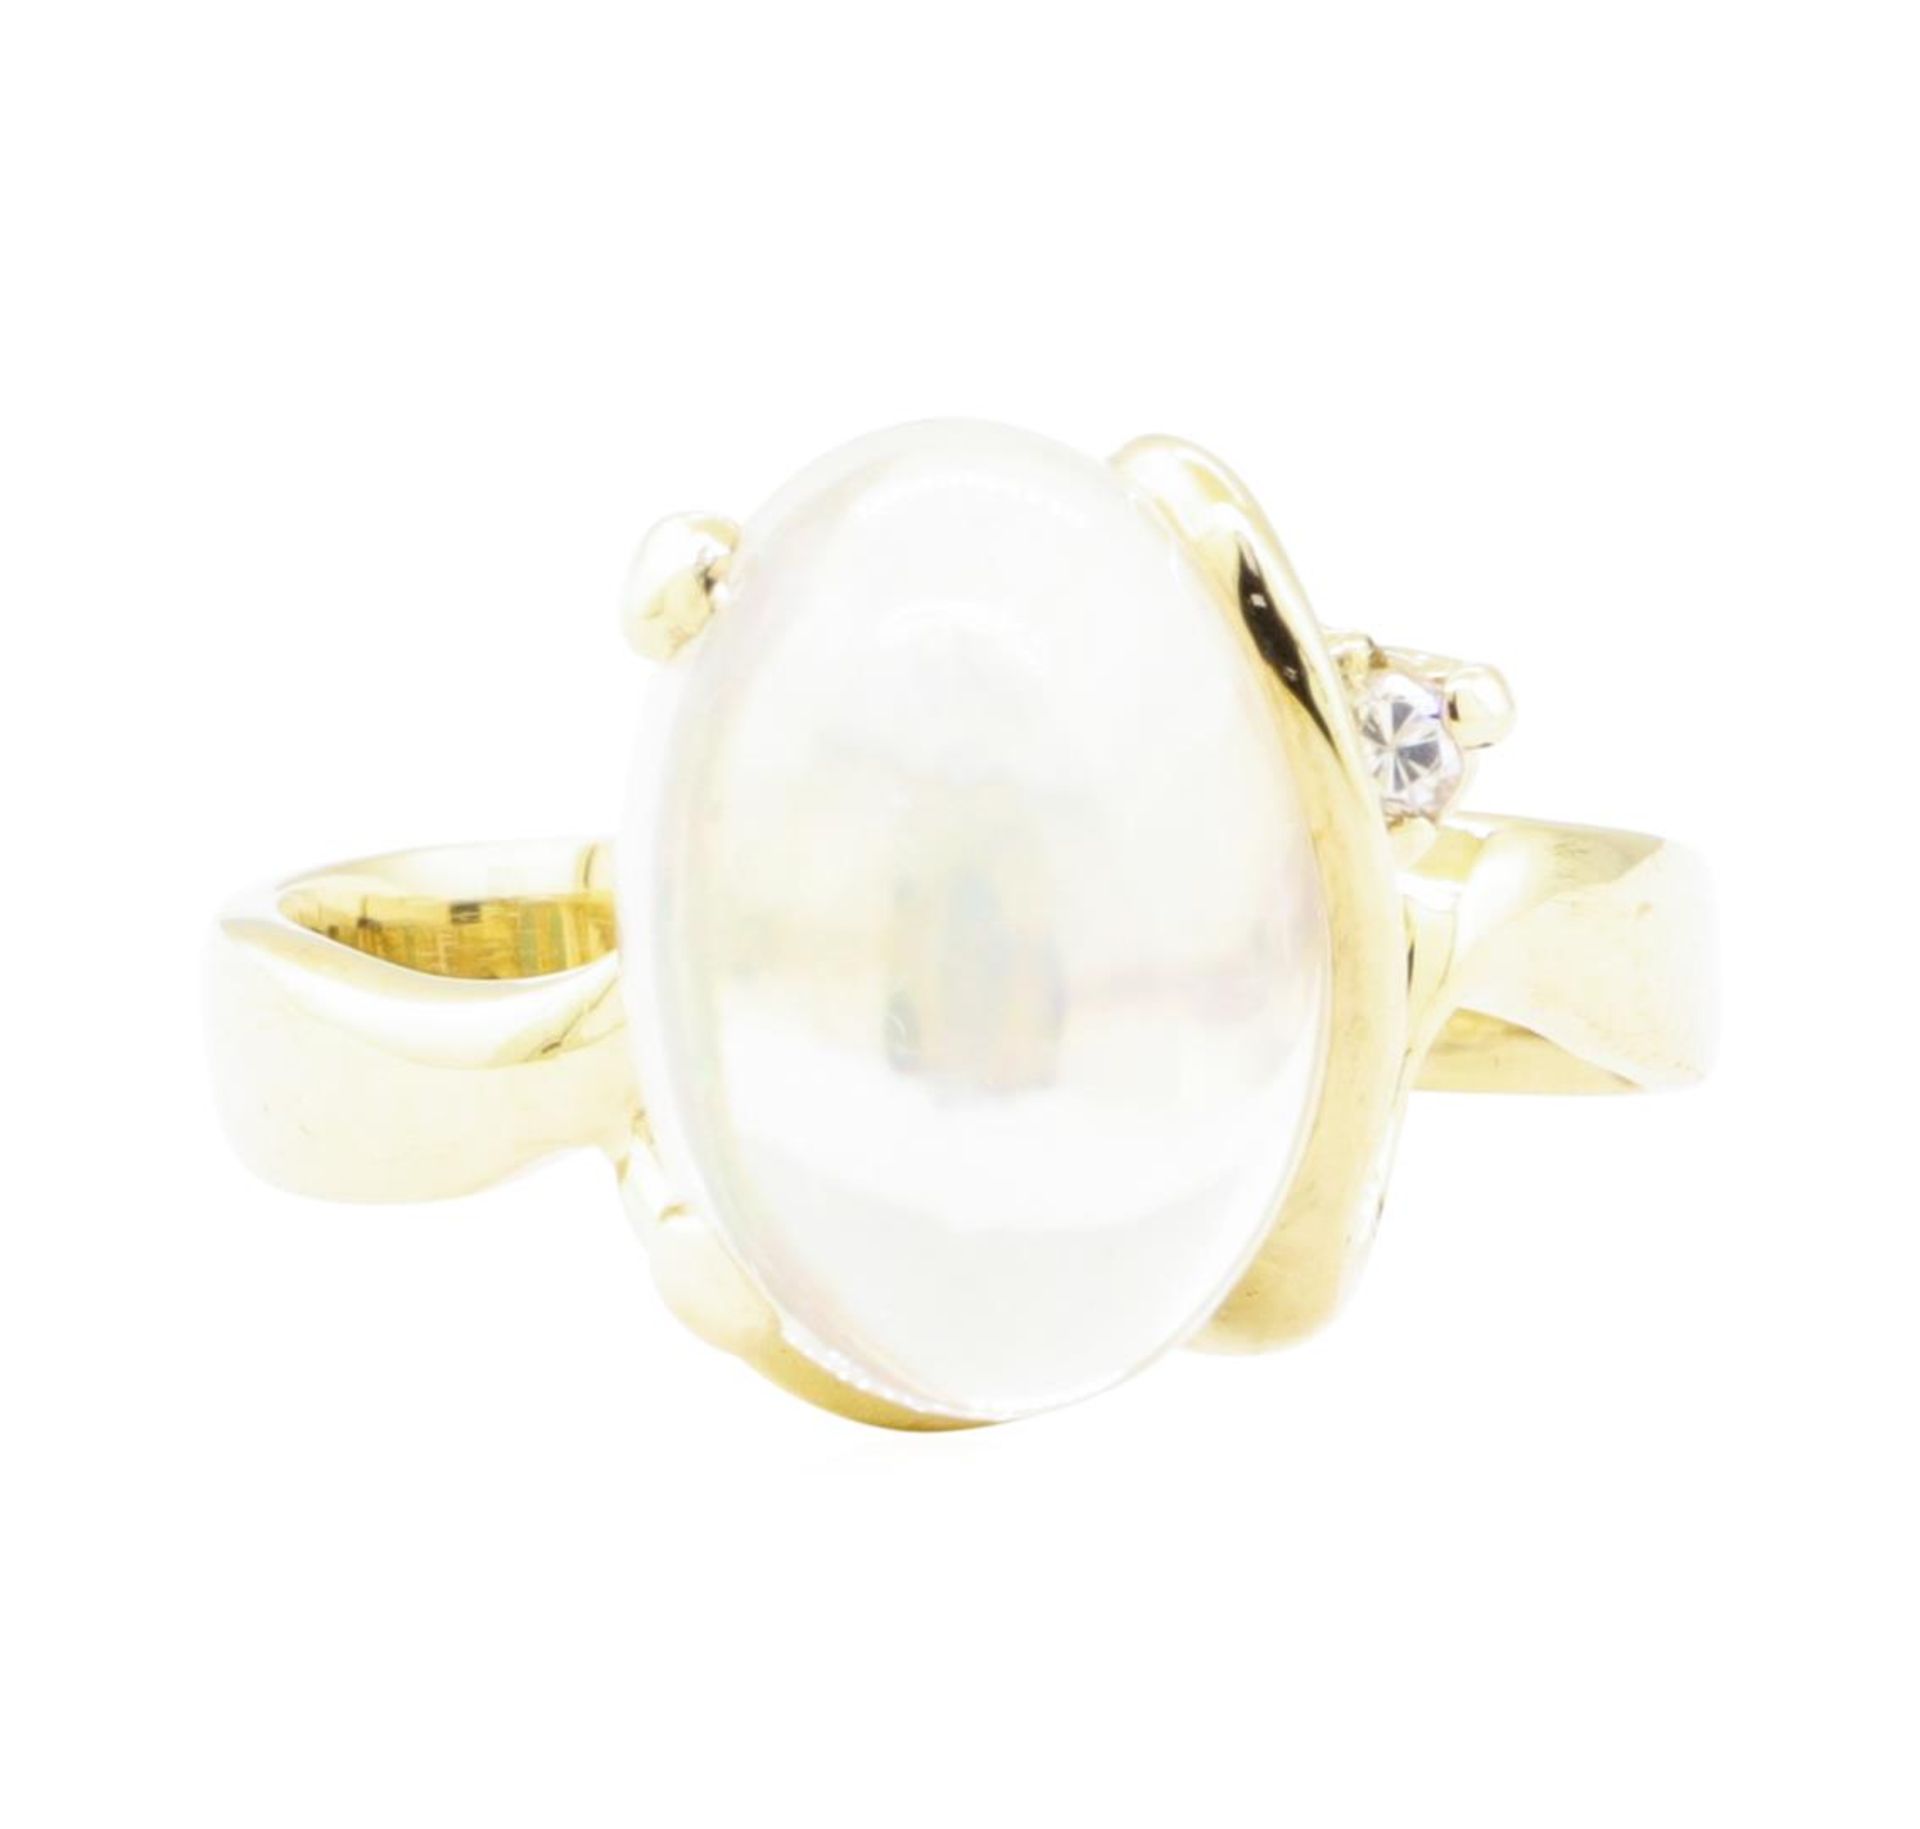 6.88 ctw Opal and Diamond Ring - 14KT Yellow Gold - Image 2 of 4